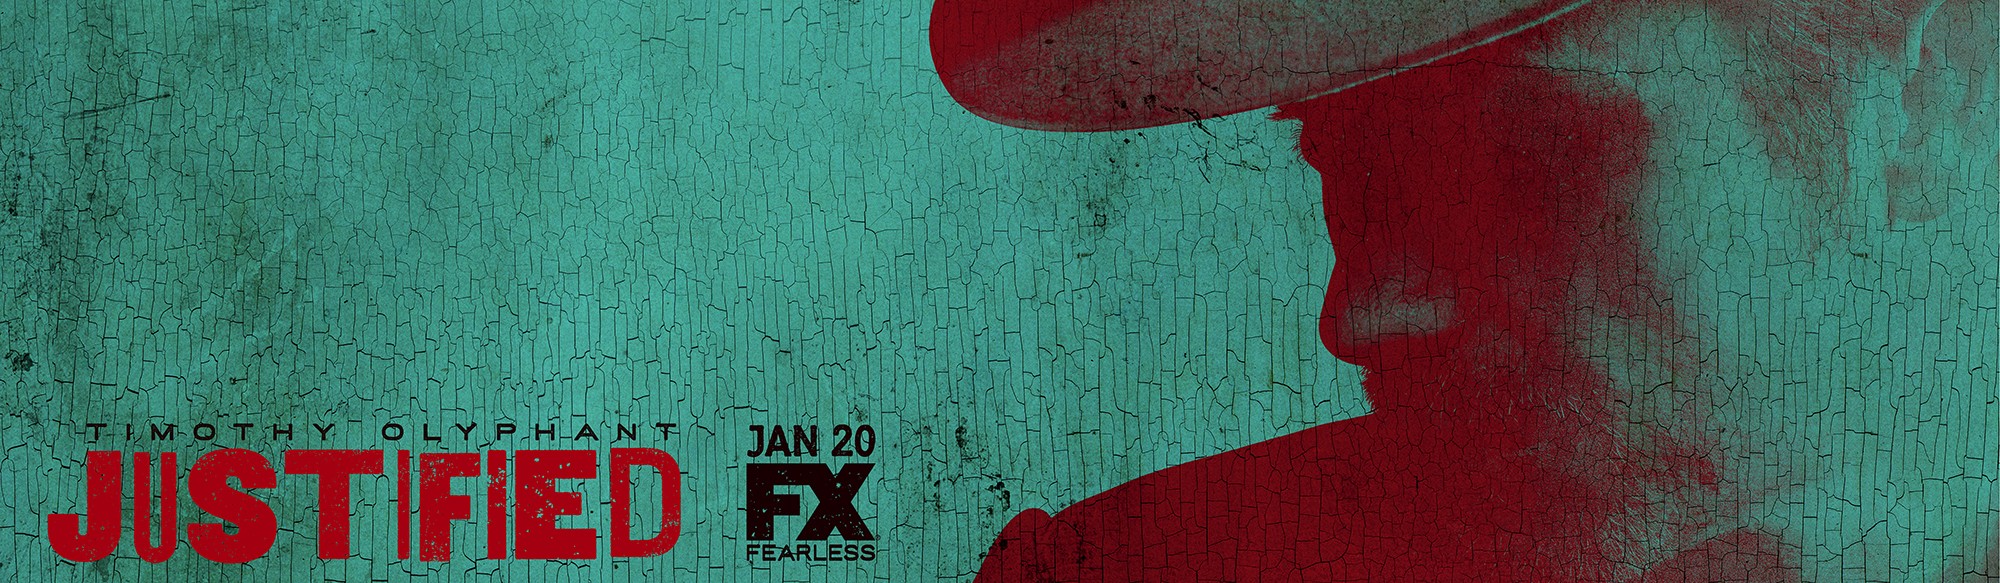 Mega Sized TV Poster Image for Justified (#12 of 12)